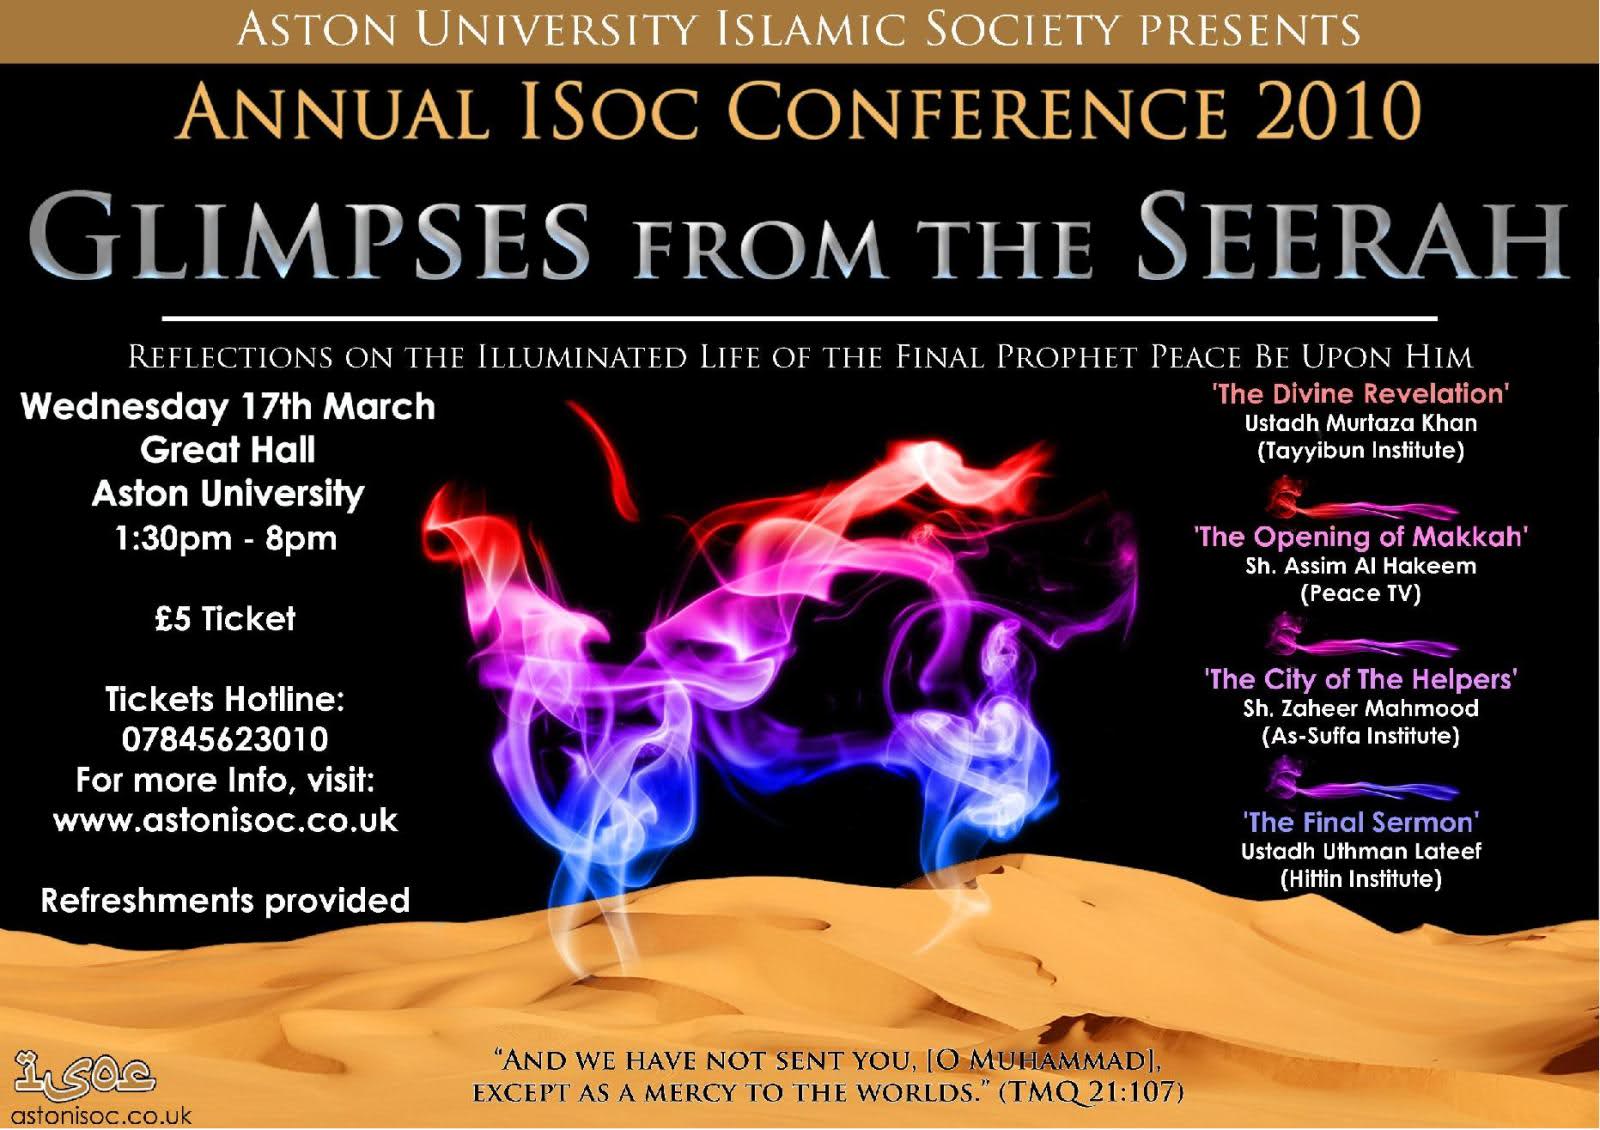 2e1t40n 1 - Aston ISOC: Seerah Conference